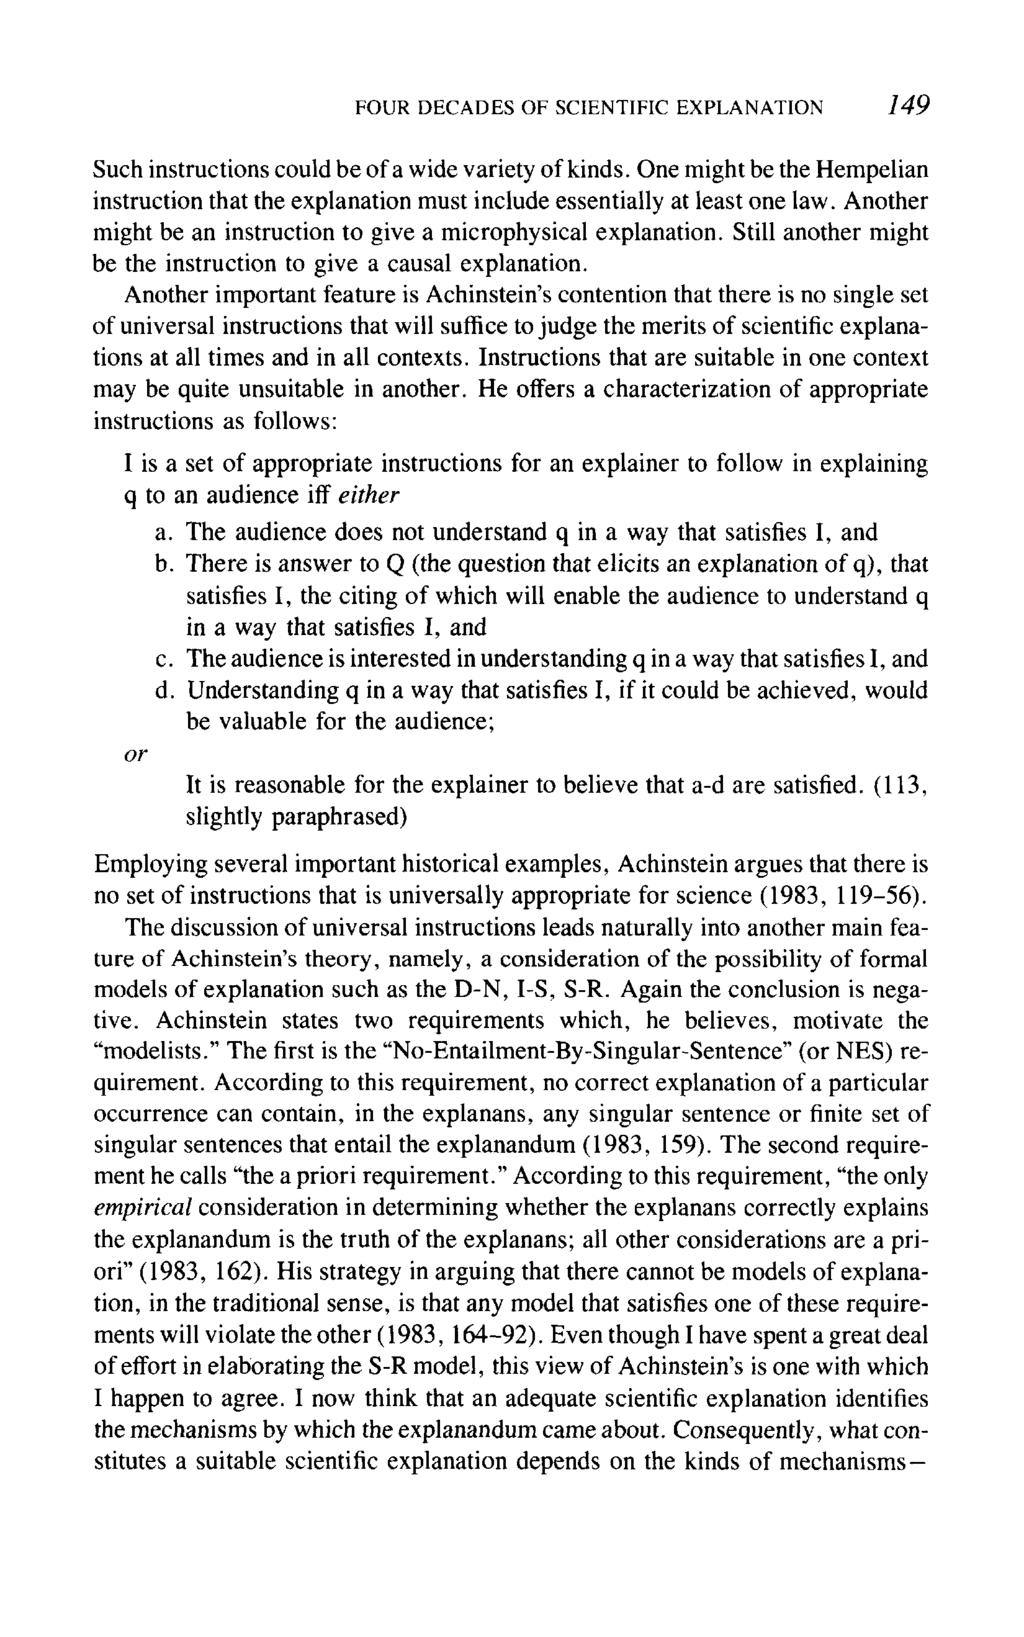 FOUR DECADES OF SCIENTIFIC EXPLANATION 149 Such instructions could be of a wide variety of kinds. One might be the Hempelian instruction that the explanation must include essentially at least one law.